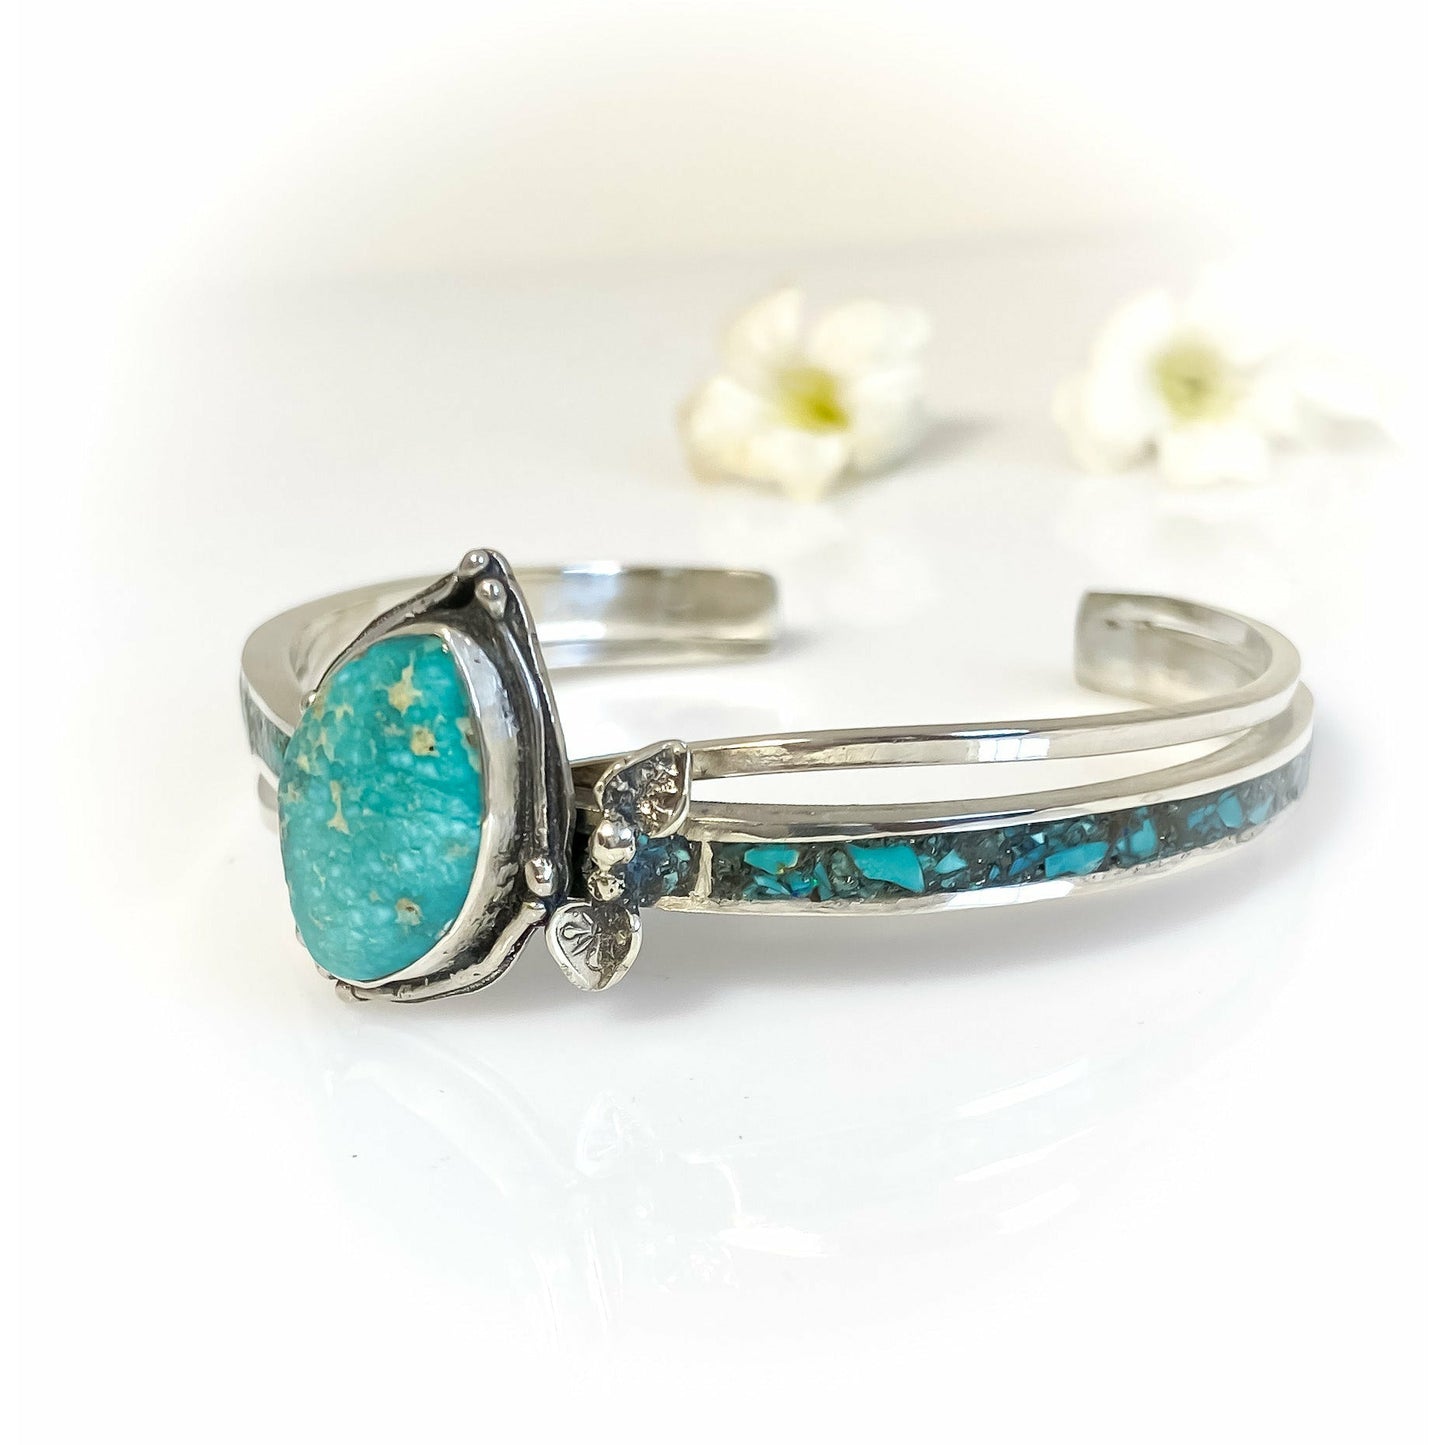 Turquoise Double Bangle Sterling Silver Inlay Cuff Bracelet